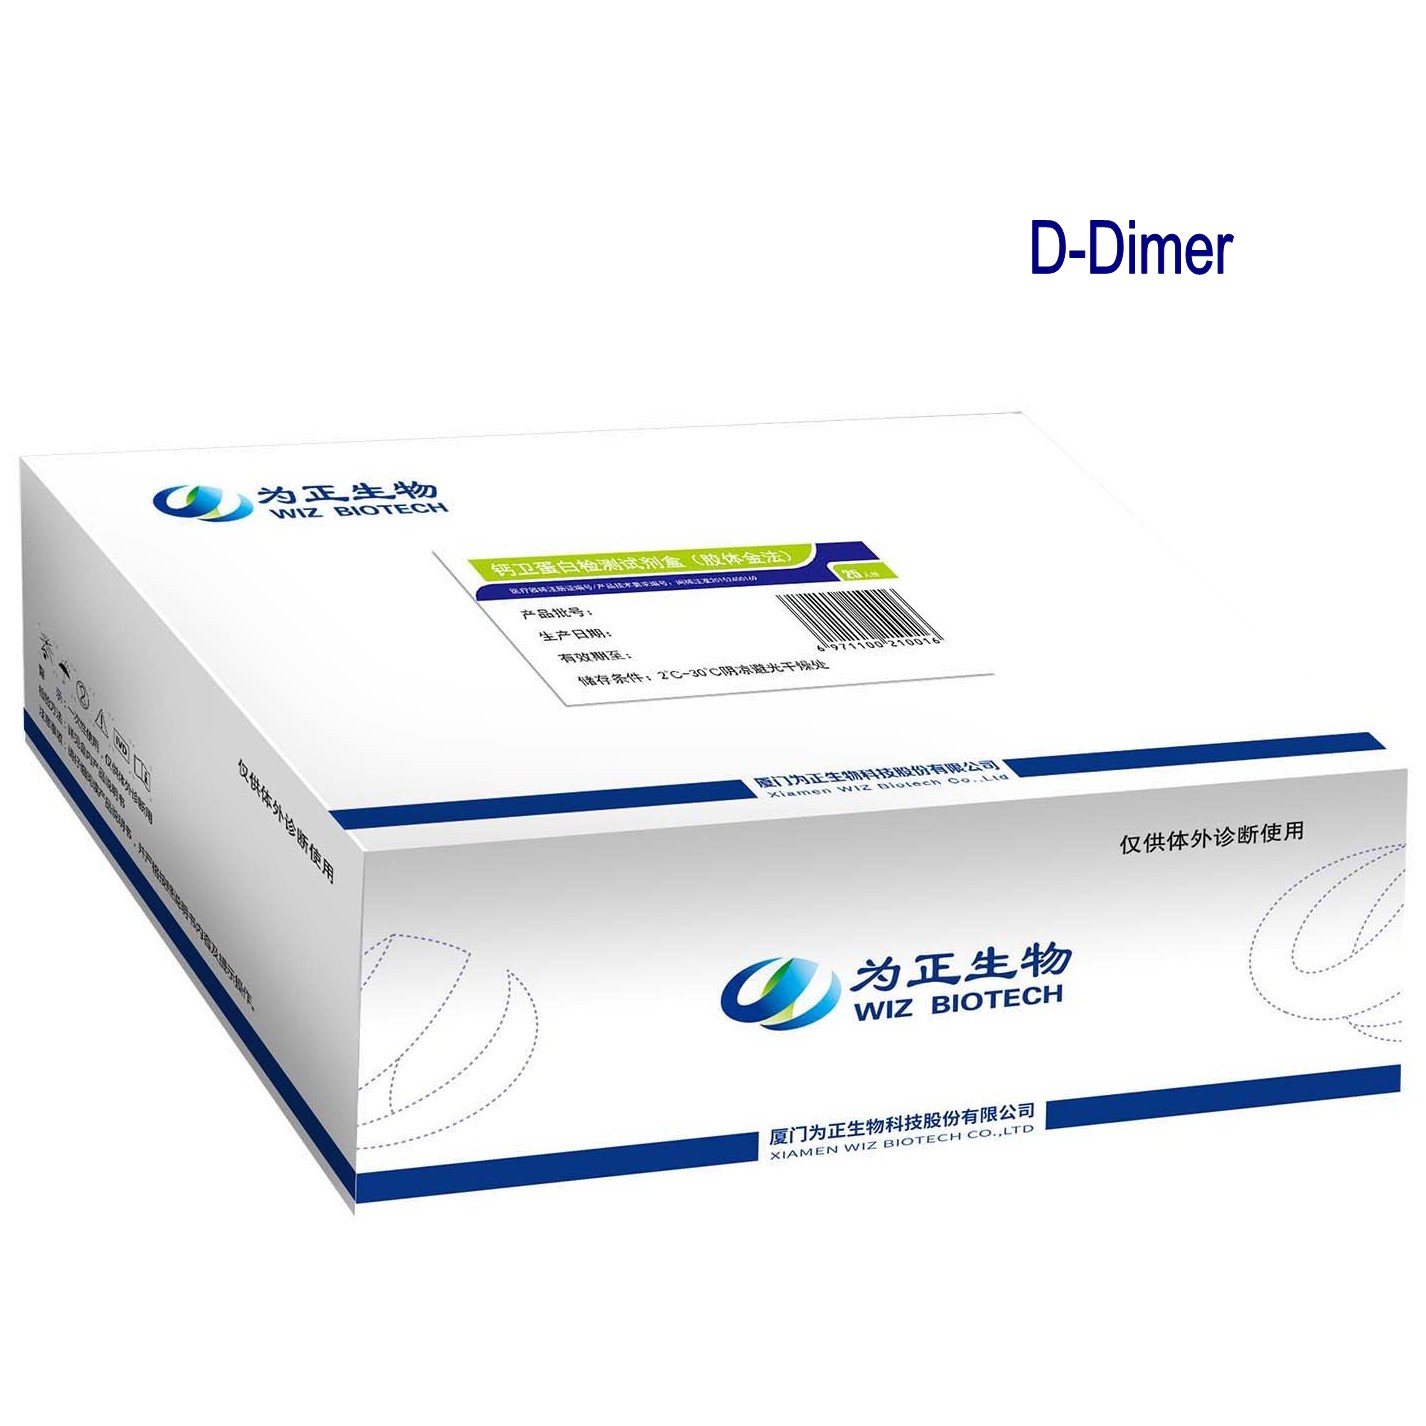 Manufacturing Companies for Urine Analysis Strip - Diagnostic Kit for D-Dimer (fluorescence immunochromatographic assay) – Baysen